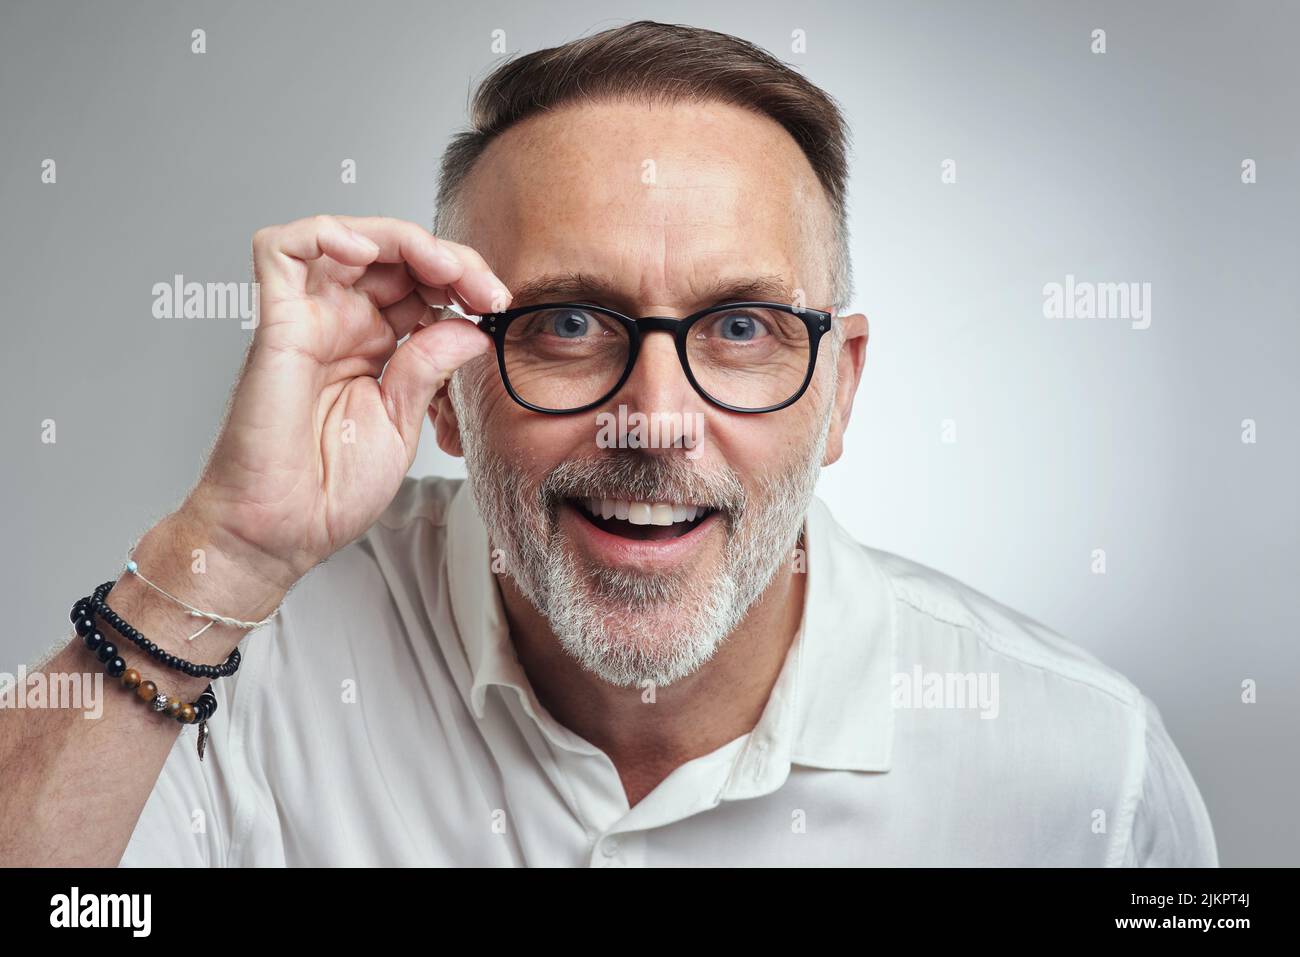 Seeing is believing. Studio portrait of a mature man wearing spectacles against a grey background. Stock Photo